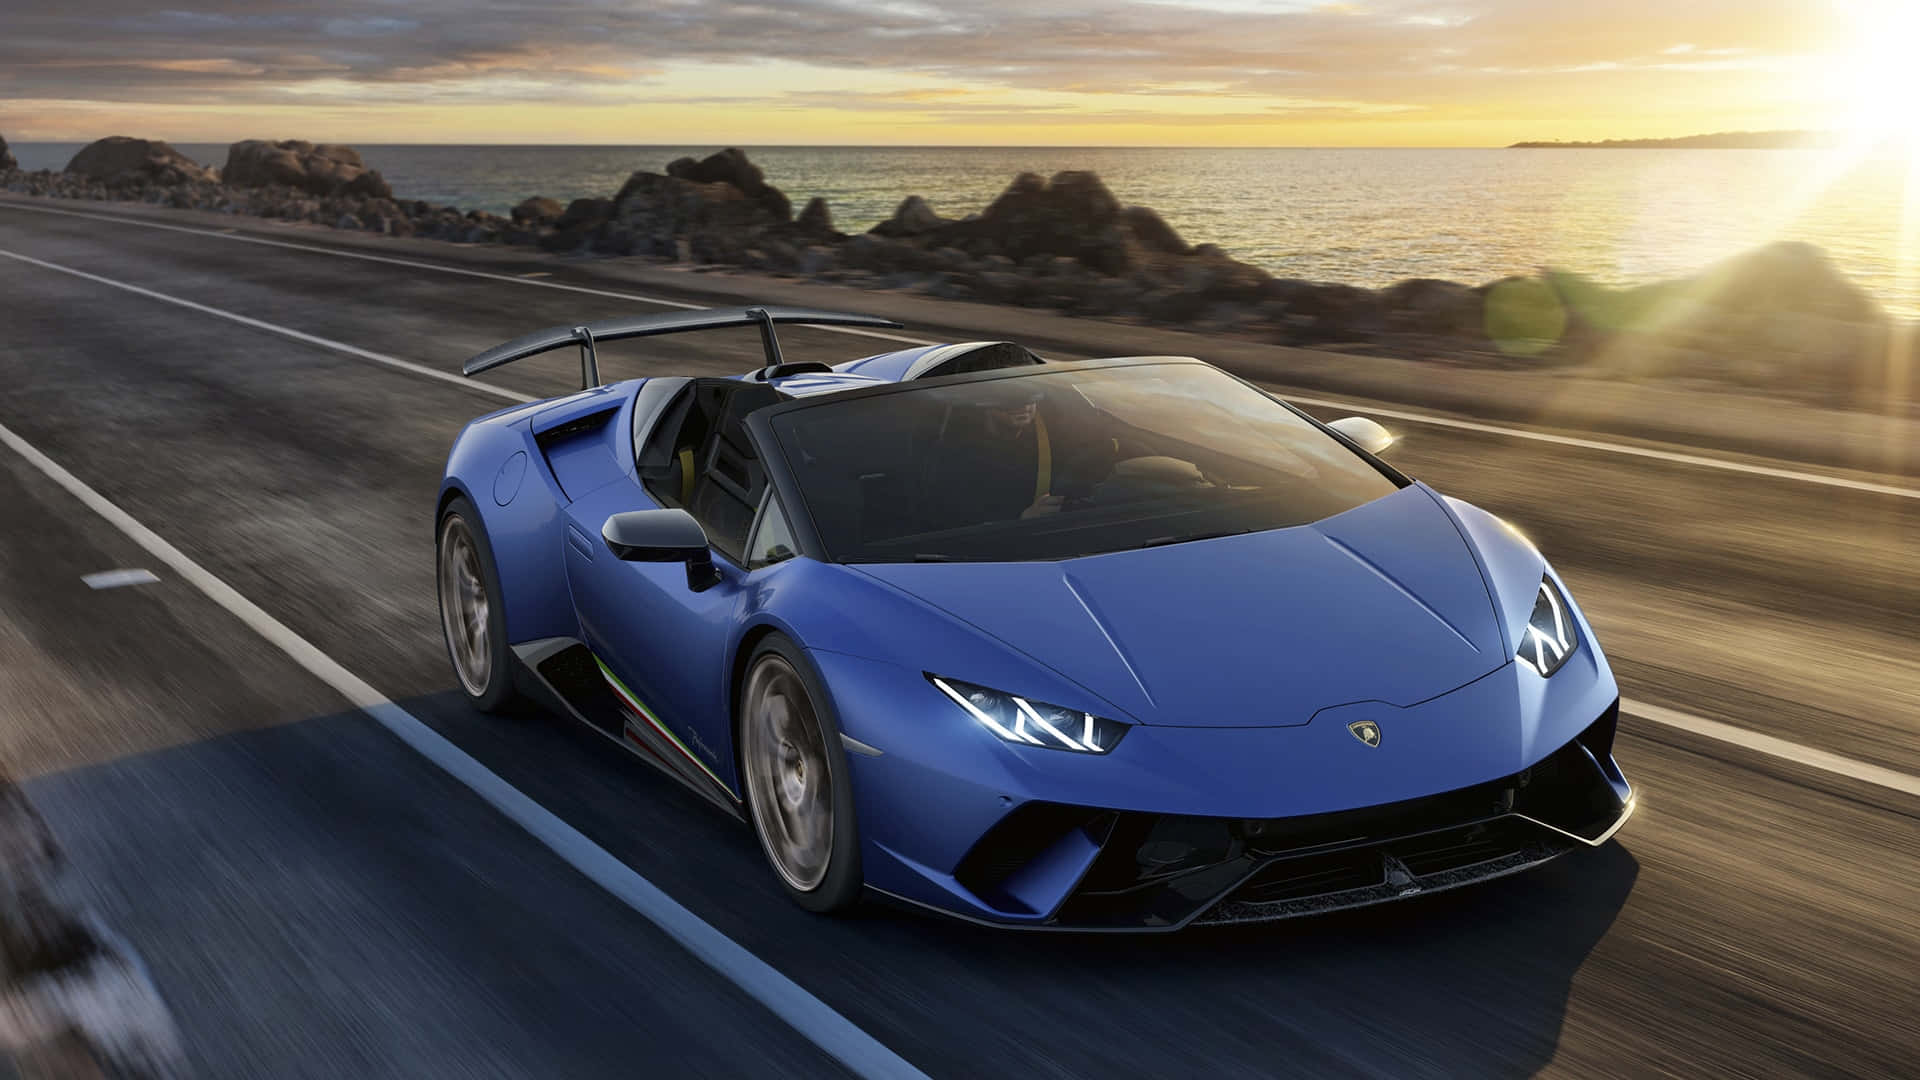 Enjoy the Ride in this Blue Car Wallpaper